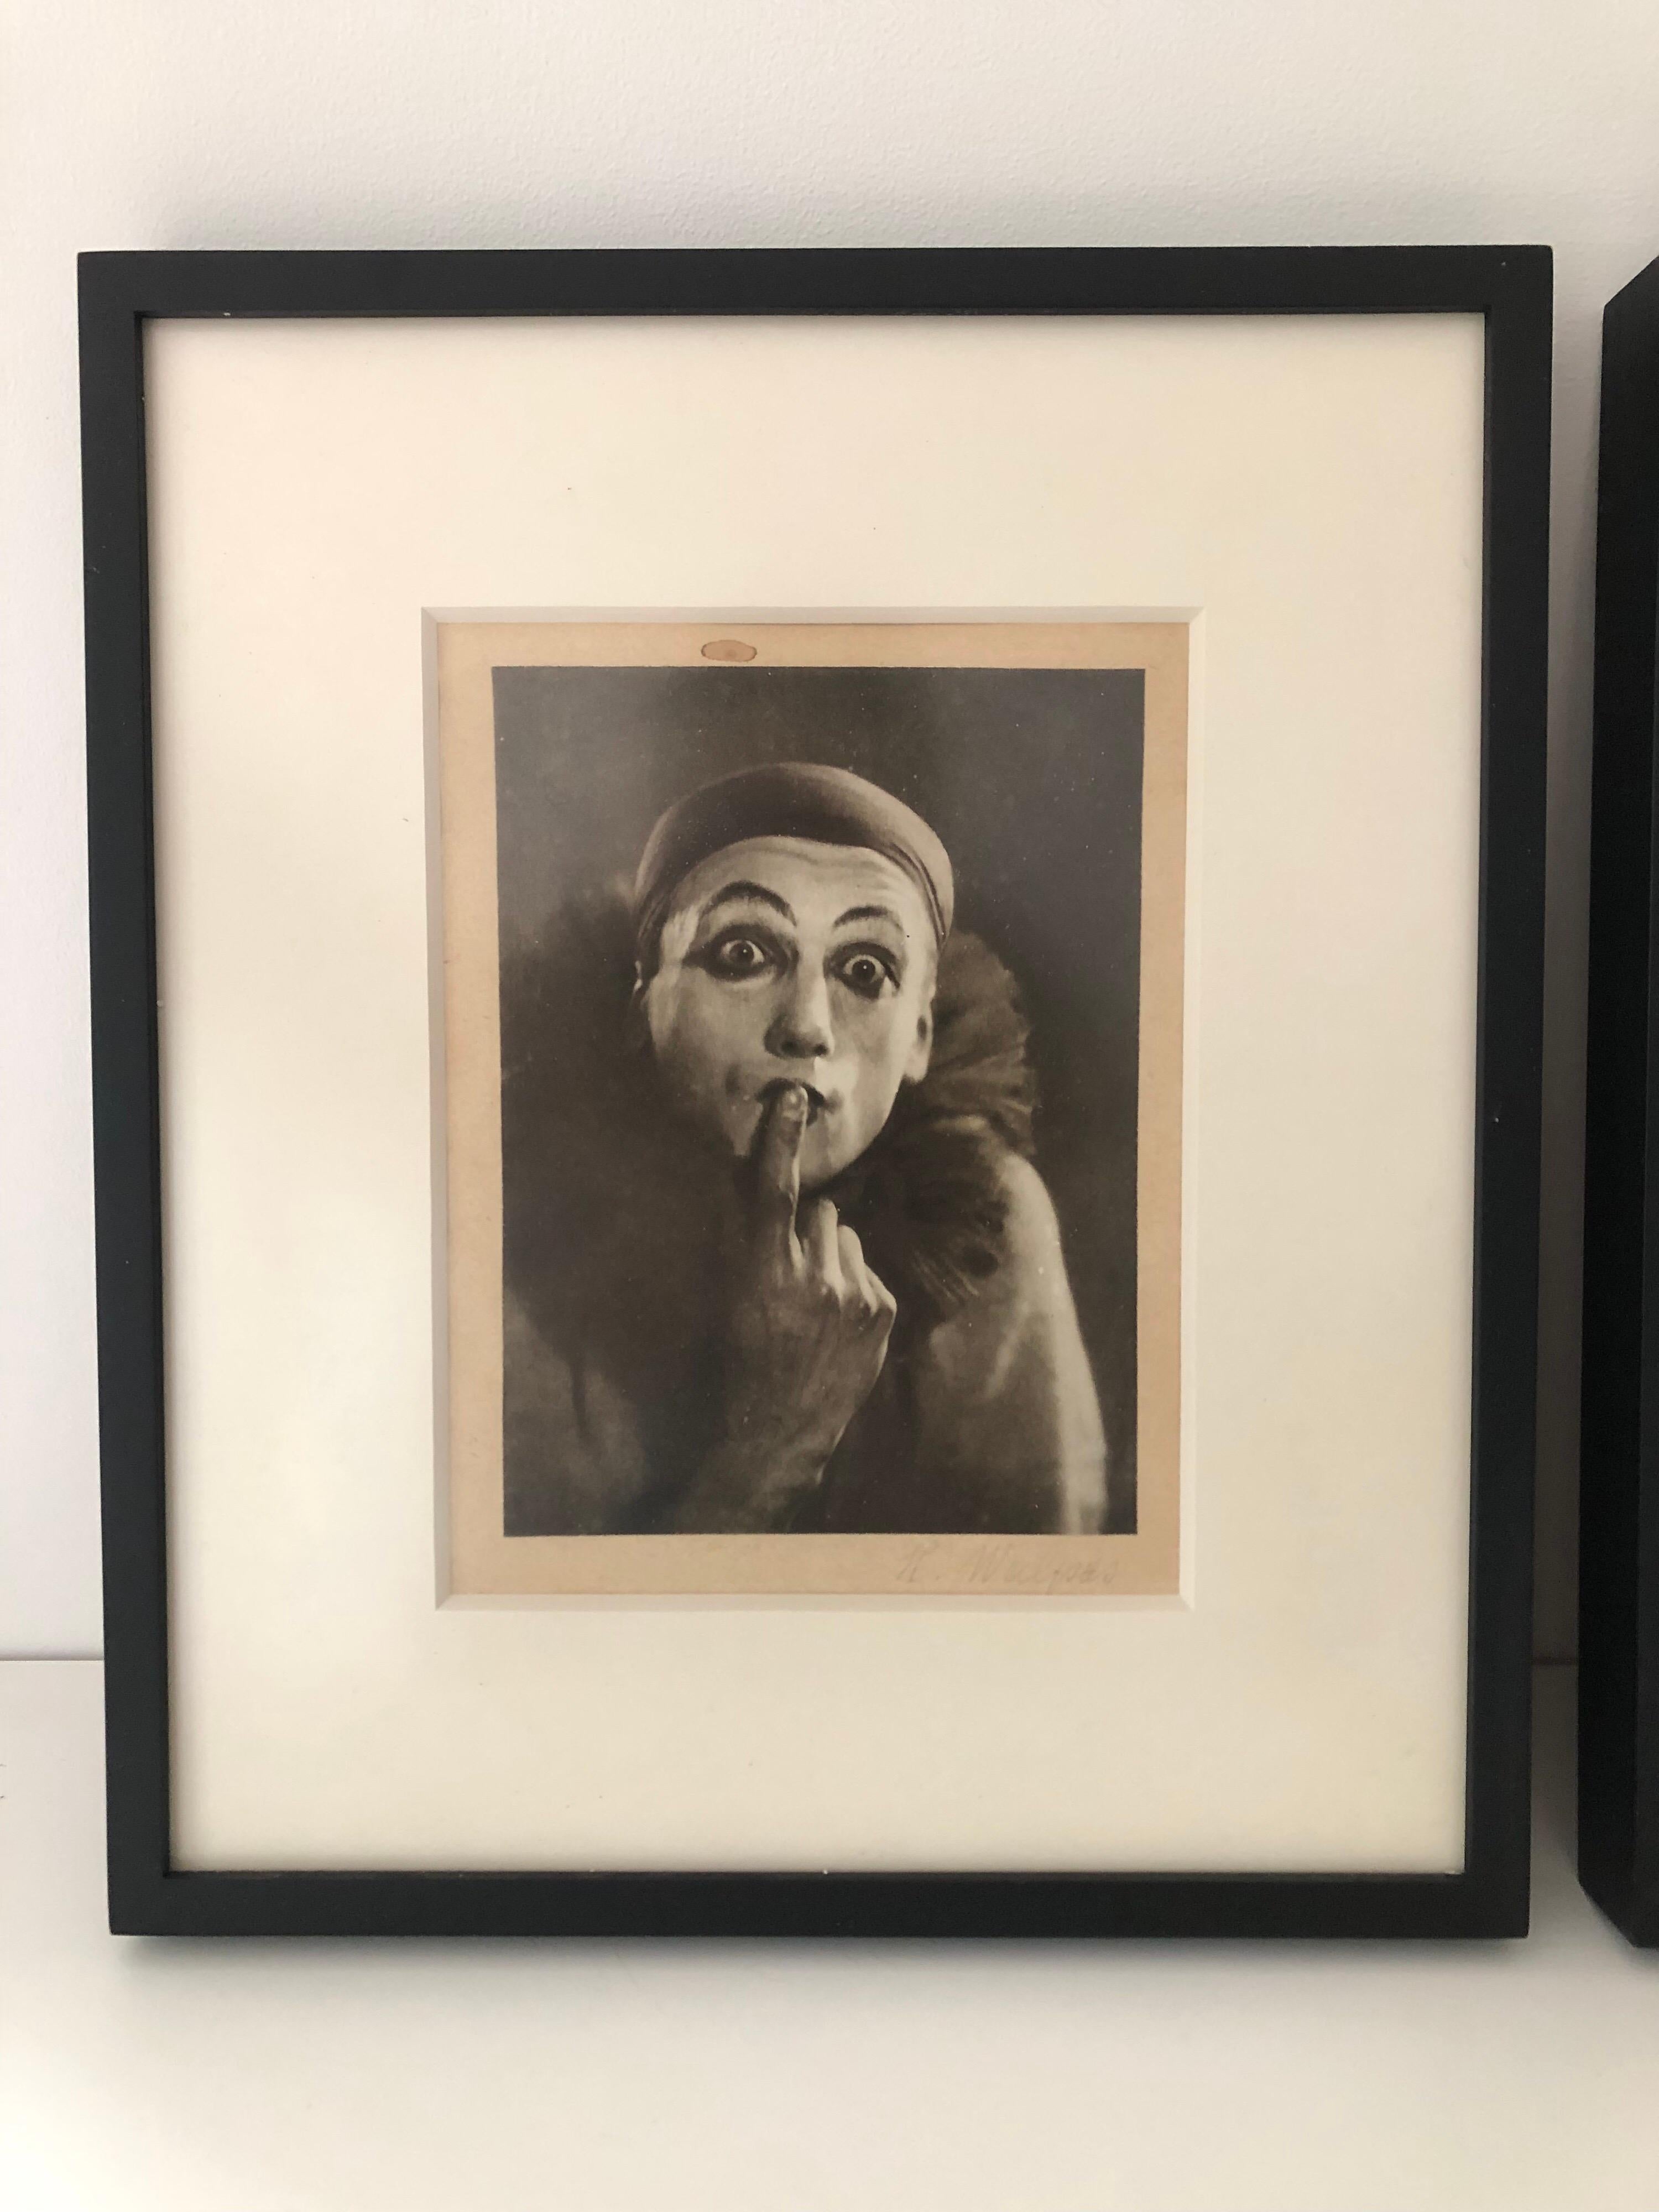 A set of three vintage framed photograph portraits of a mime. With a black frame, matting, and UV filter glass.